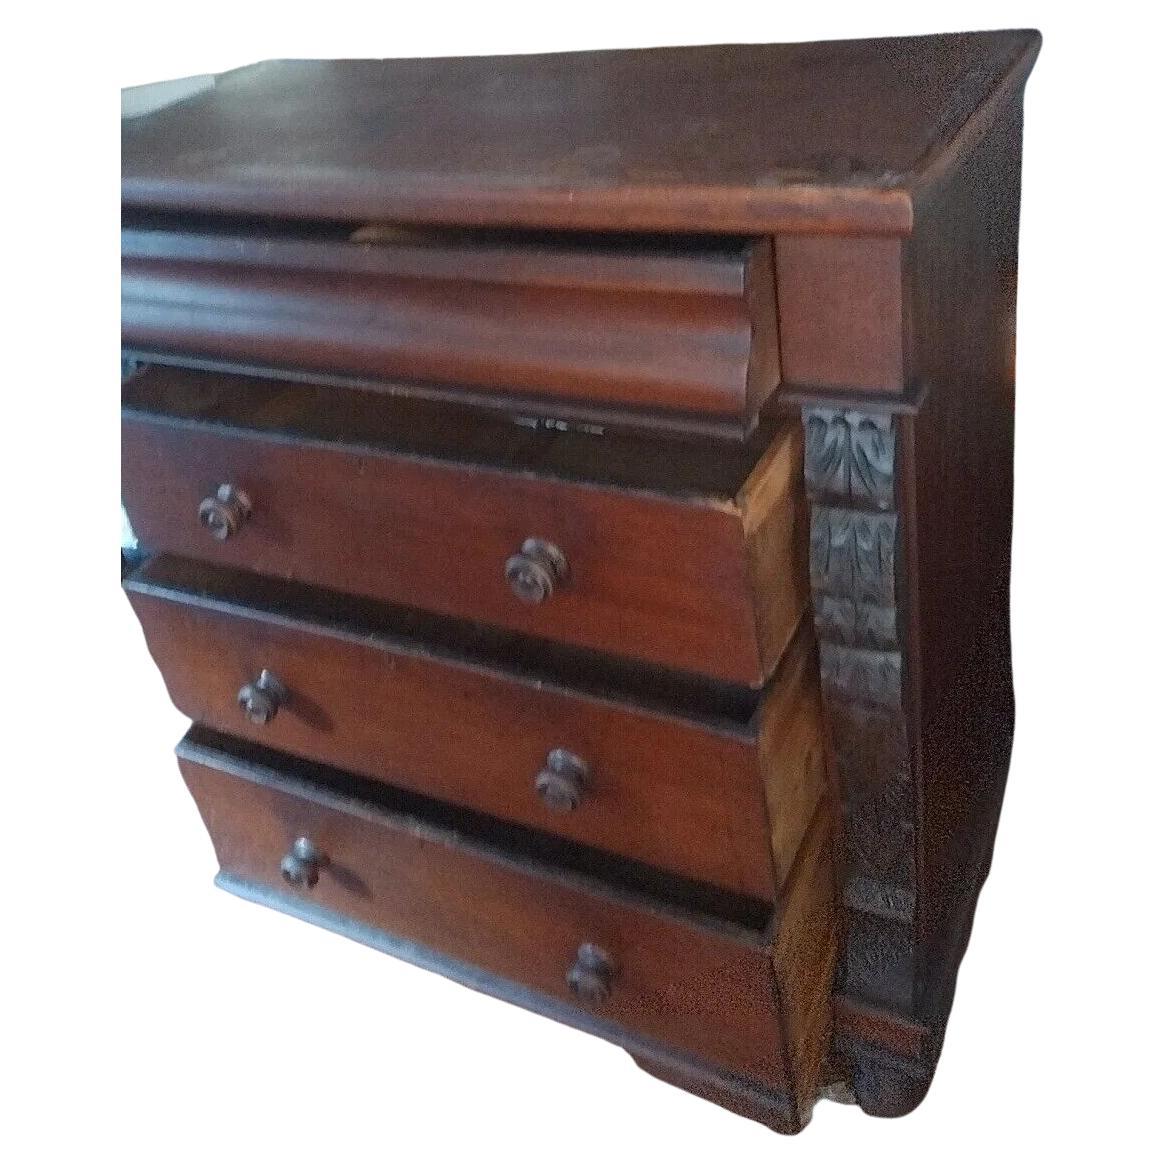 A Very Handsome Scottish Dresser or Chest of Drawers in Mahogany, circa 1880s.

The dresser has beautifully decorative turned, carved columns and bun feet. Four drawers, including a concealed top drawer and an extremely deep bottom drawer.